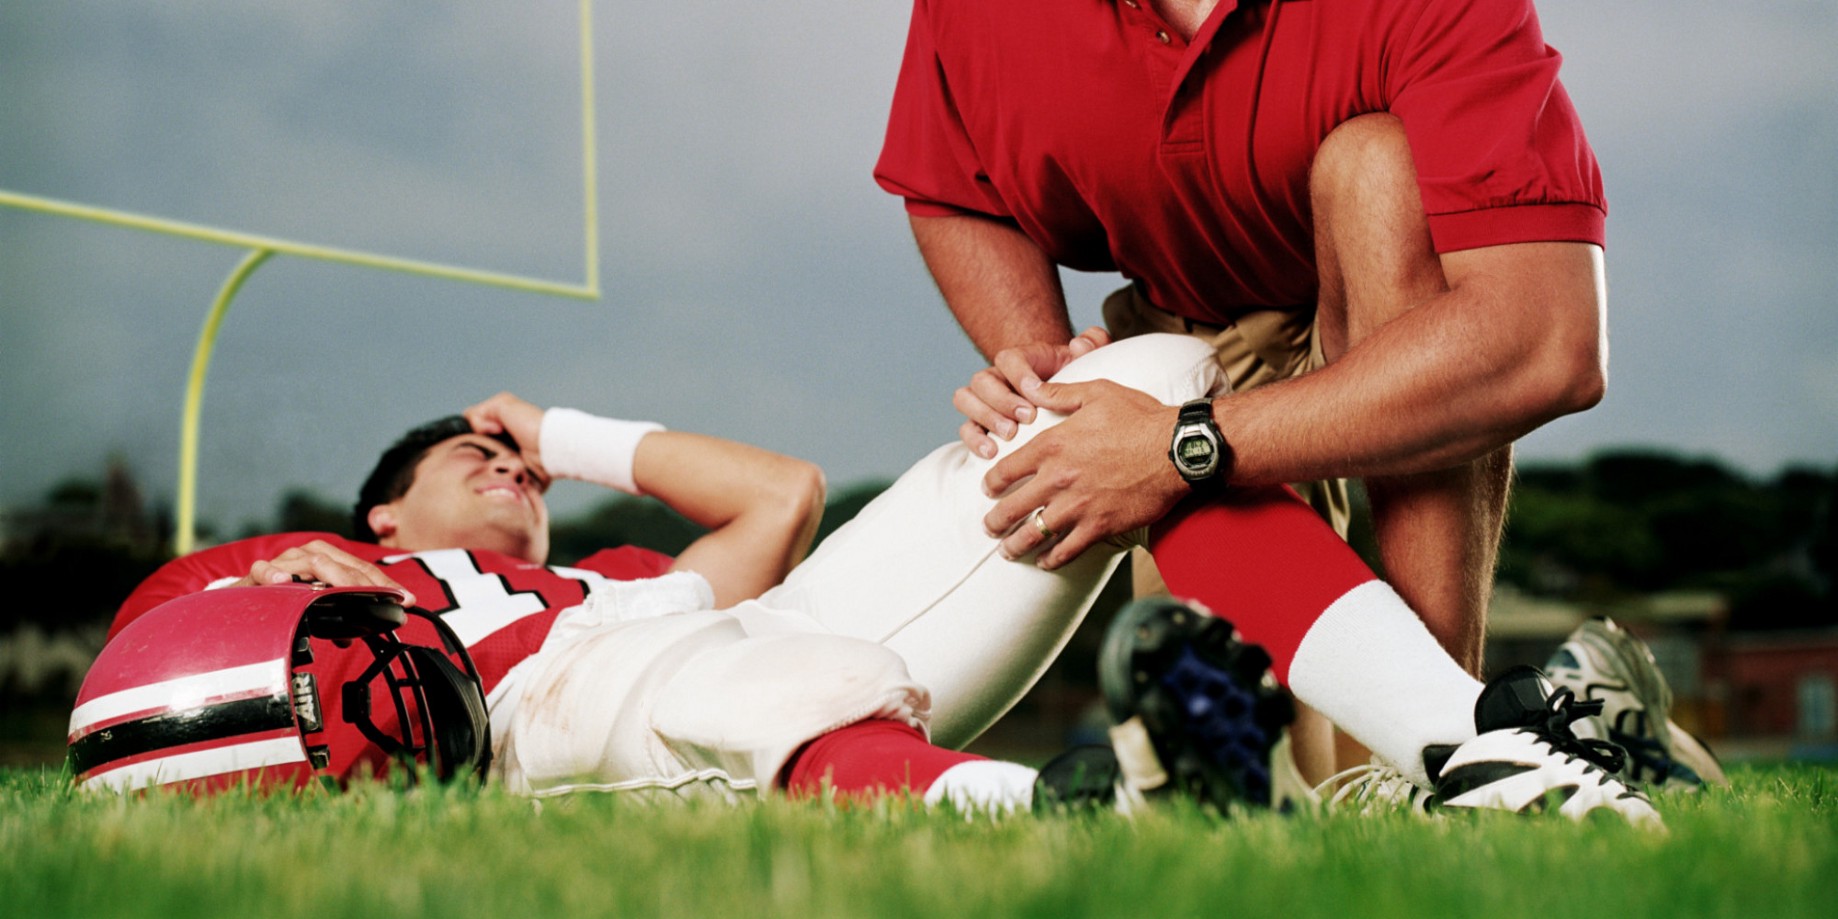 Sports And Exercise Injuries